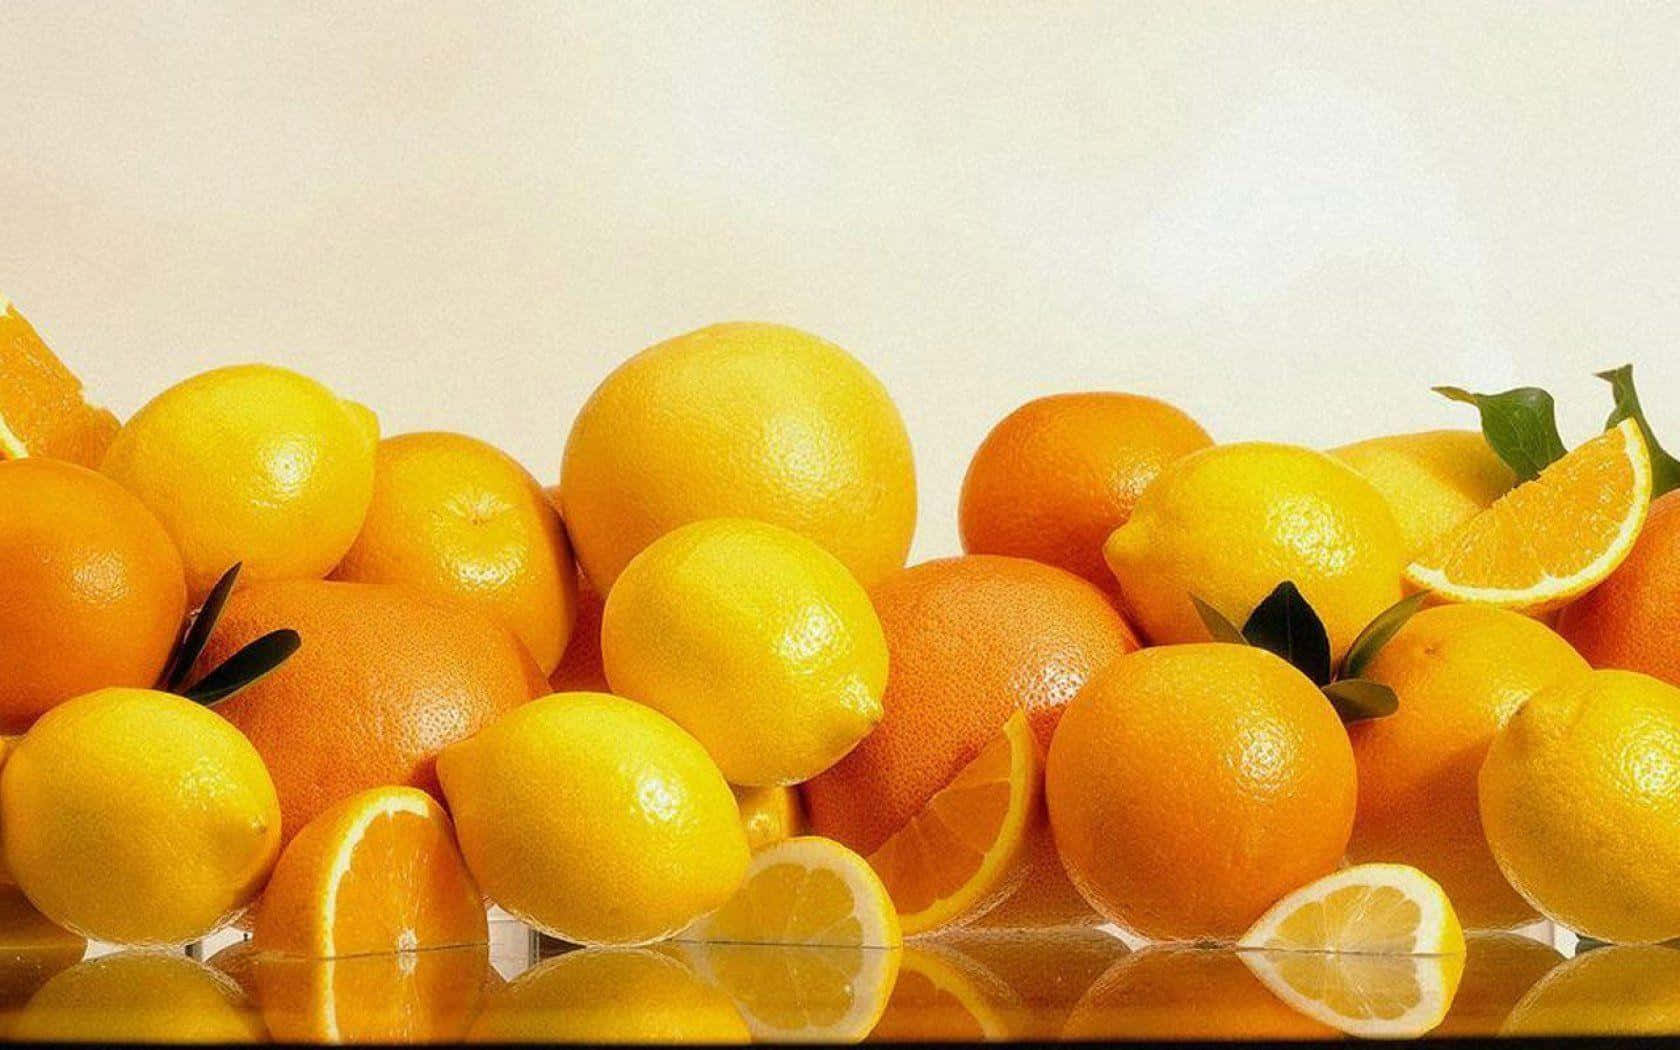 A vibrant display of fresh and juicy oranges